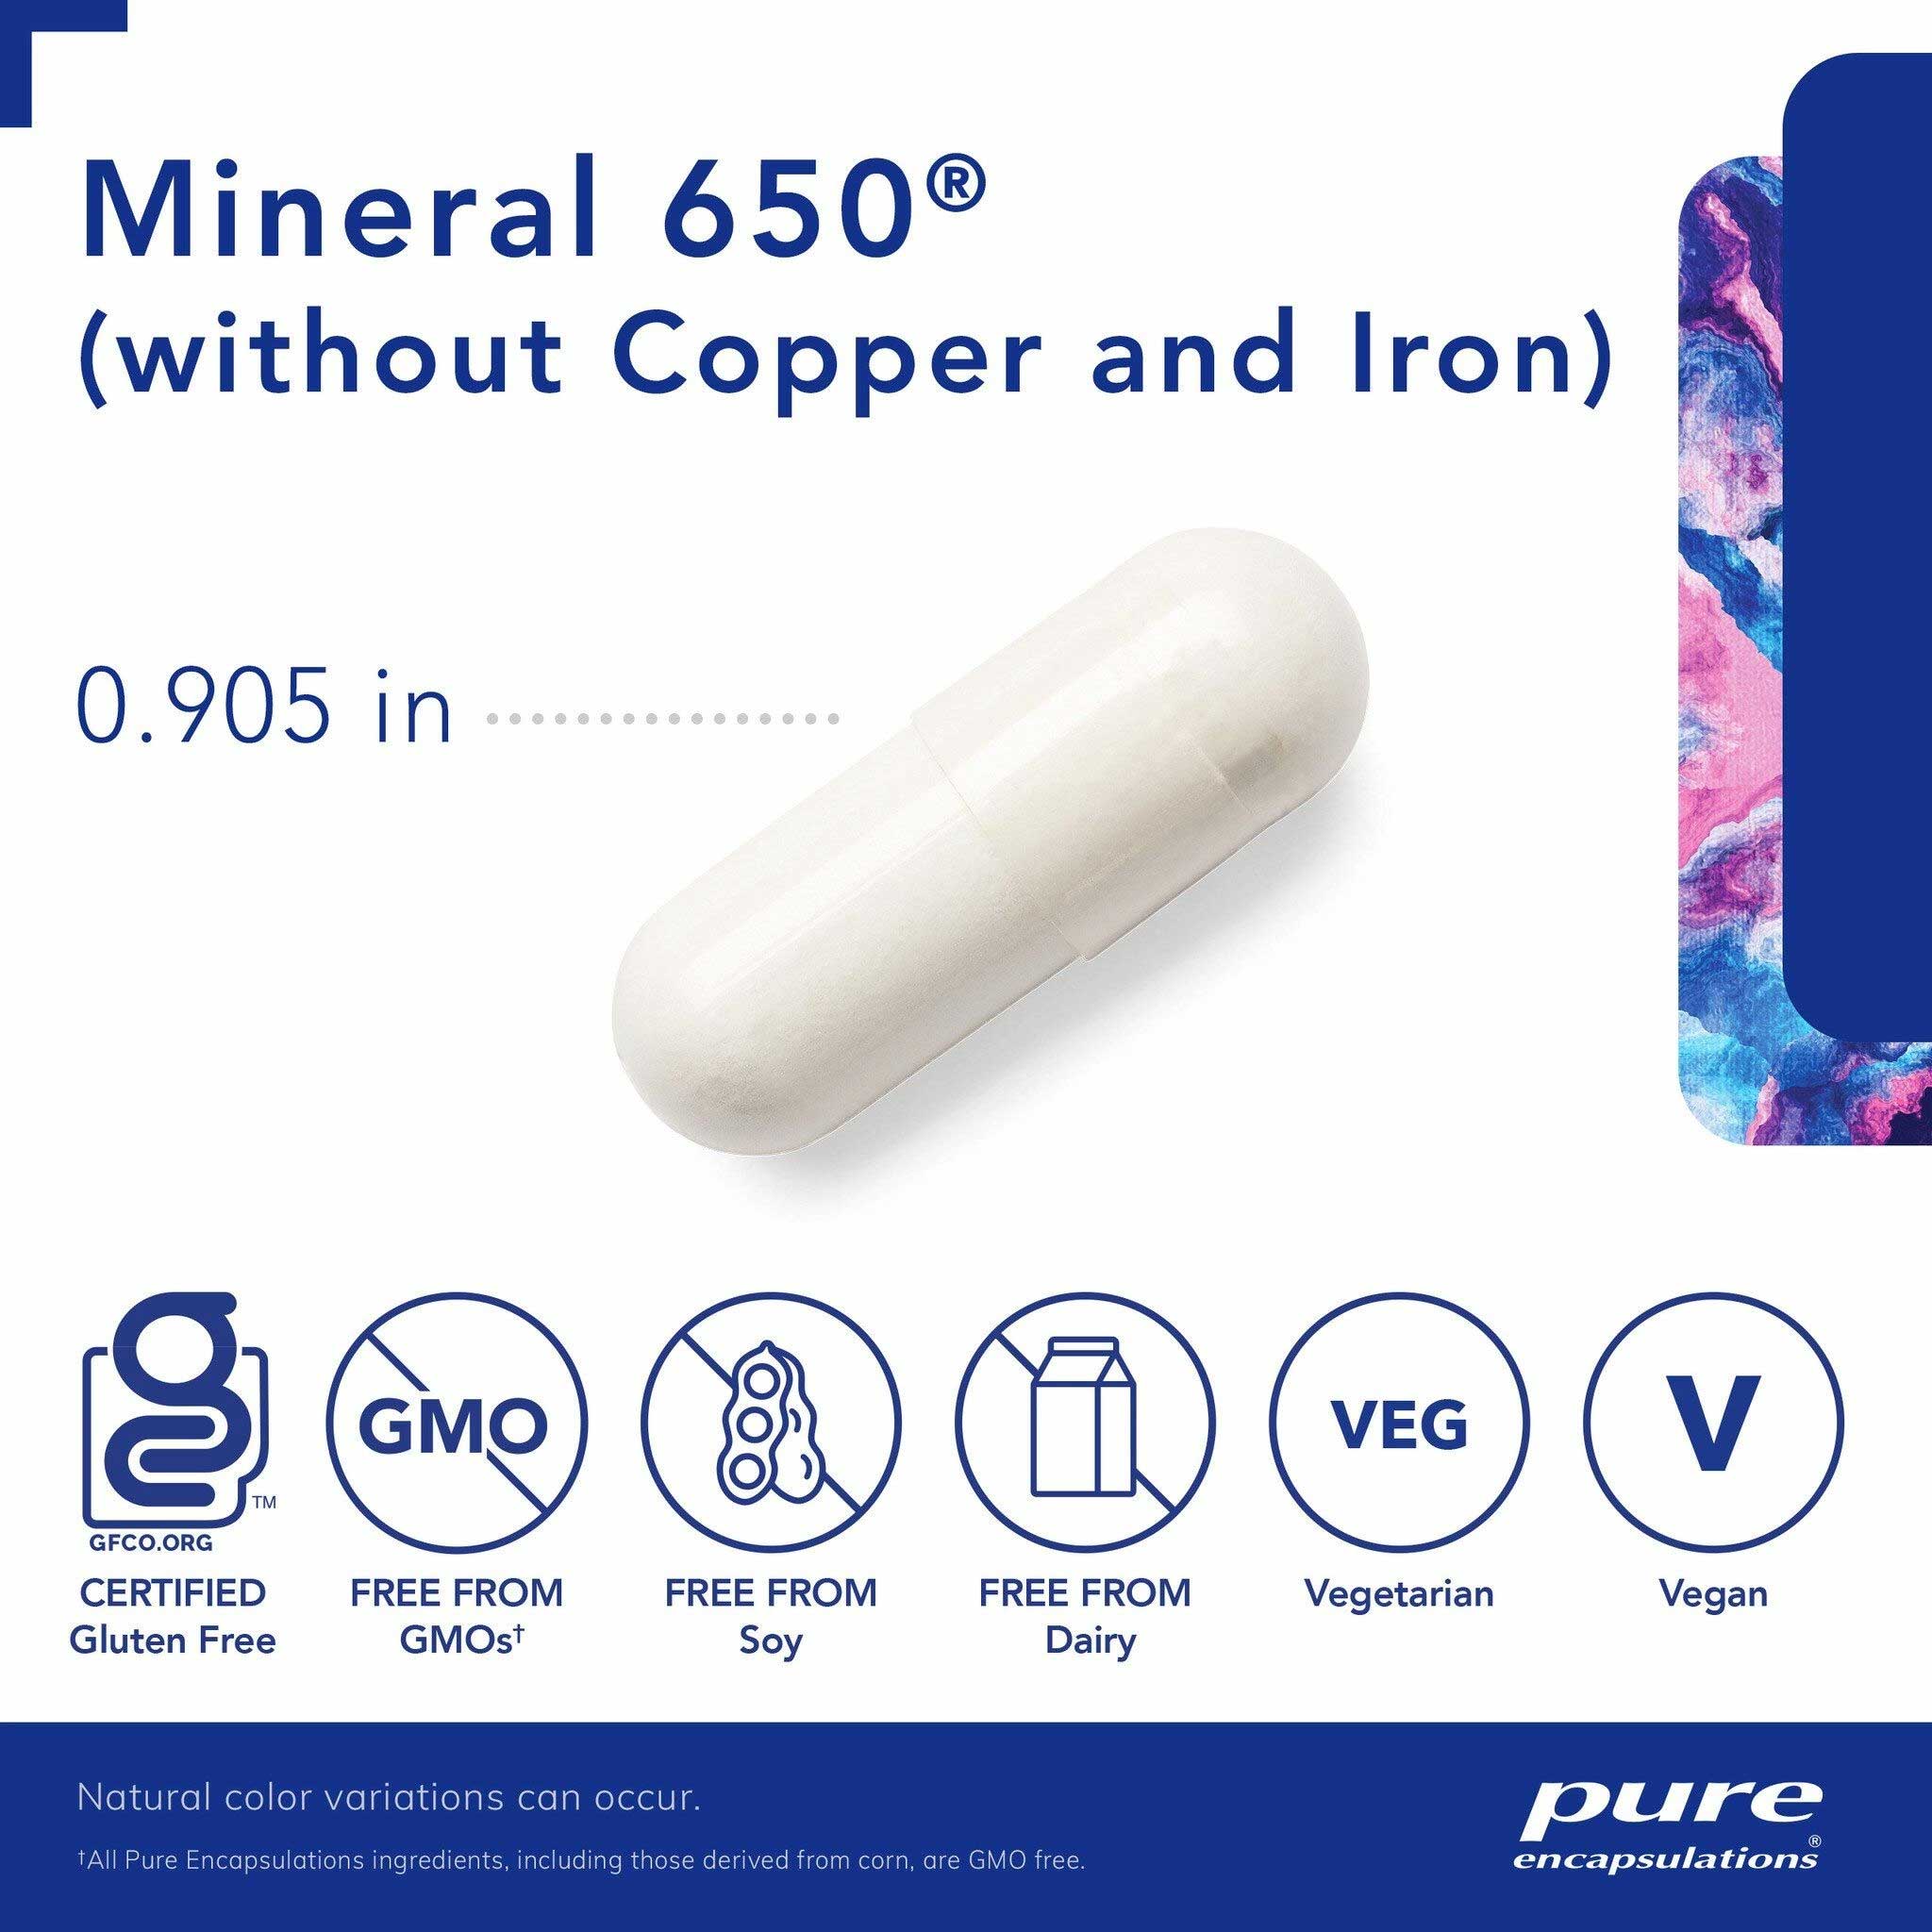 Pure Encapsulations Mineral 650 without Copper and Iron